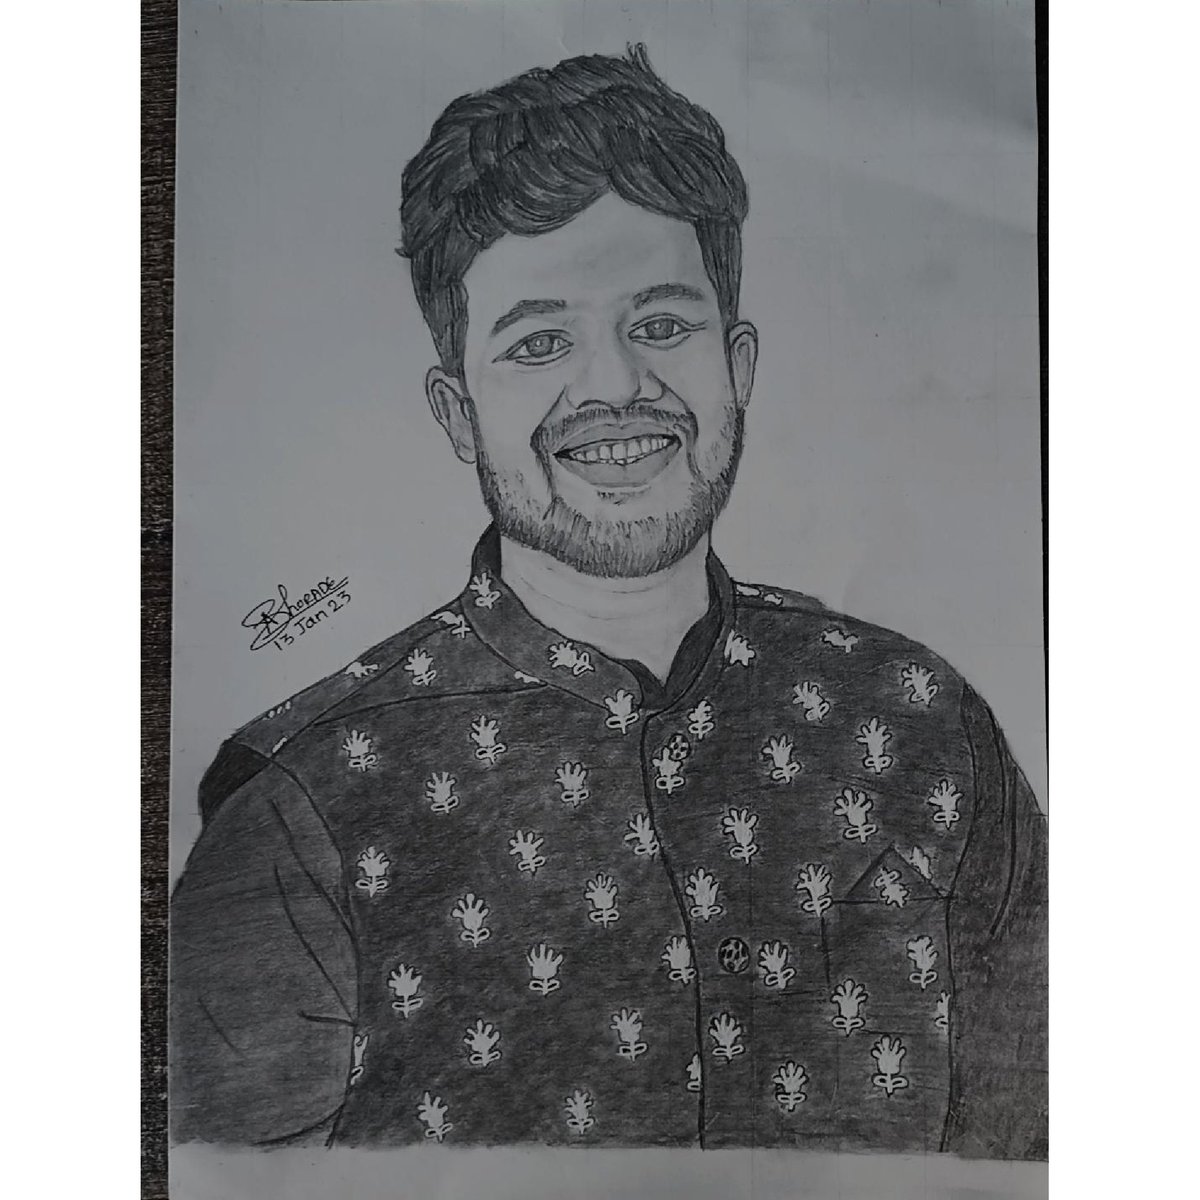 #BBM4 king of heart ❤️and real man Prasad jawade .i try to drow you one paper hope you like this 😍 #prasadkipaltan #PrasadKiPaltan #prasadjawade #biggbossmarathi #biggbossmarathi4 #colorsmarathi #bbmarathi4 #bbmarathi 
#PrasadRullingBBM4
#PrasadForWin  #PrasadJawadeRullingBbm4